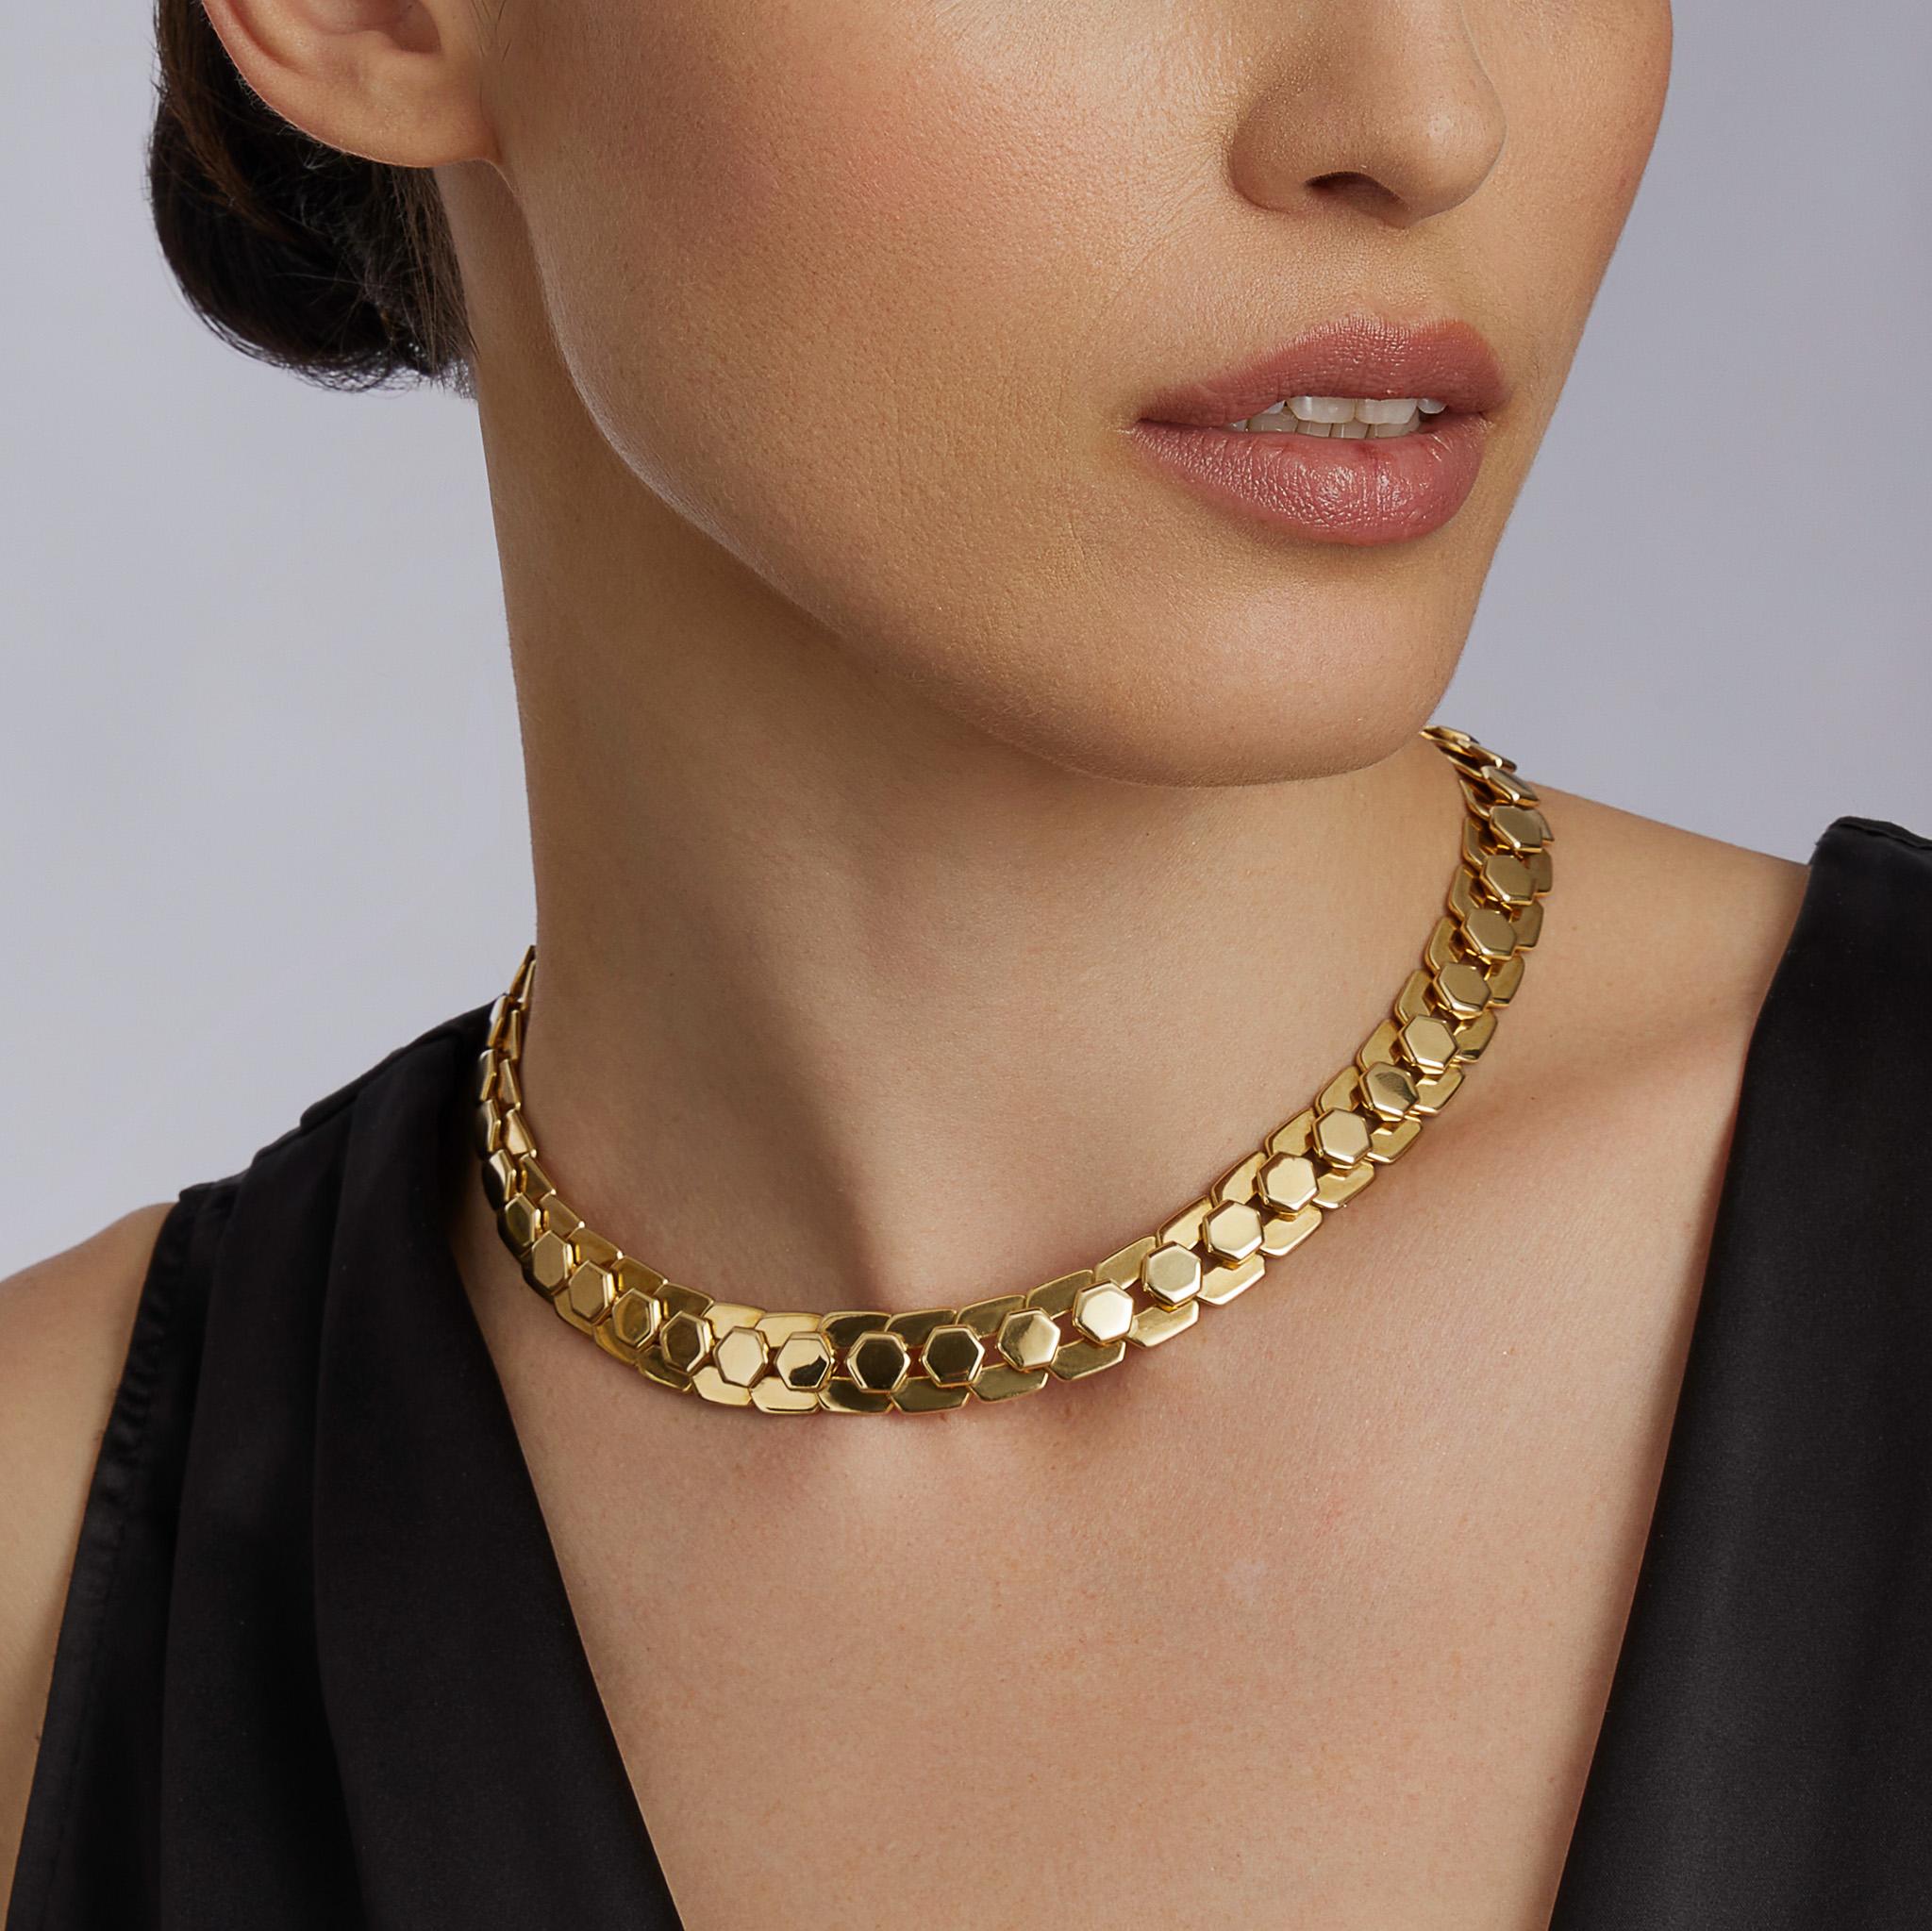 Created by Marina B in 1987, this necklace is made of 18K gold. It is composed of two lines of hexagonal links, one designed as solid forms surmounting overlapping open links. Streamlined and ingeniously constructed, this sleek necklace offers